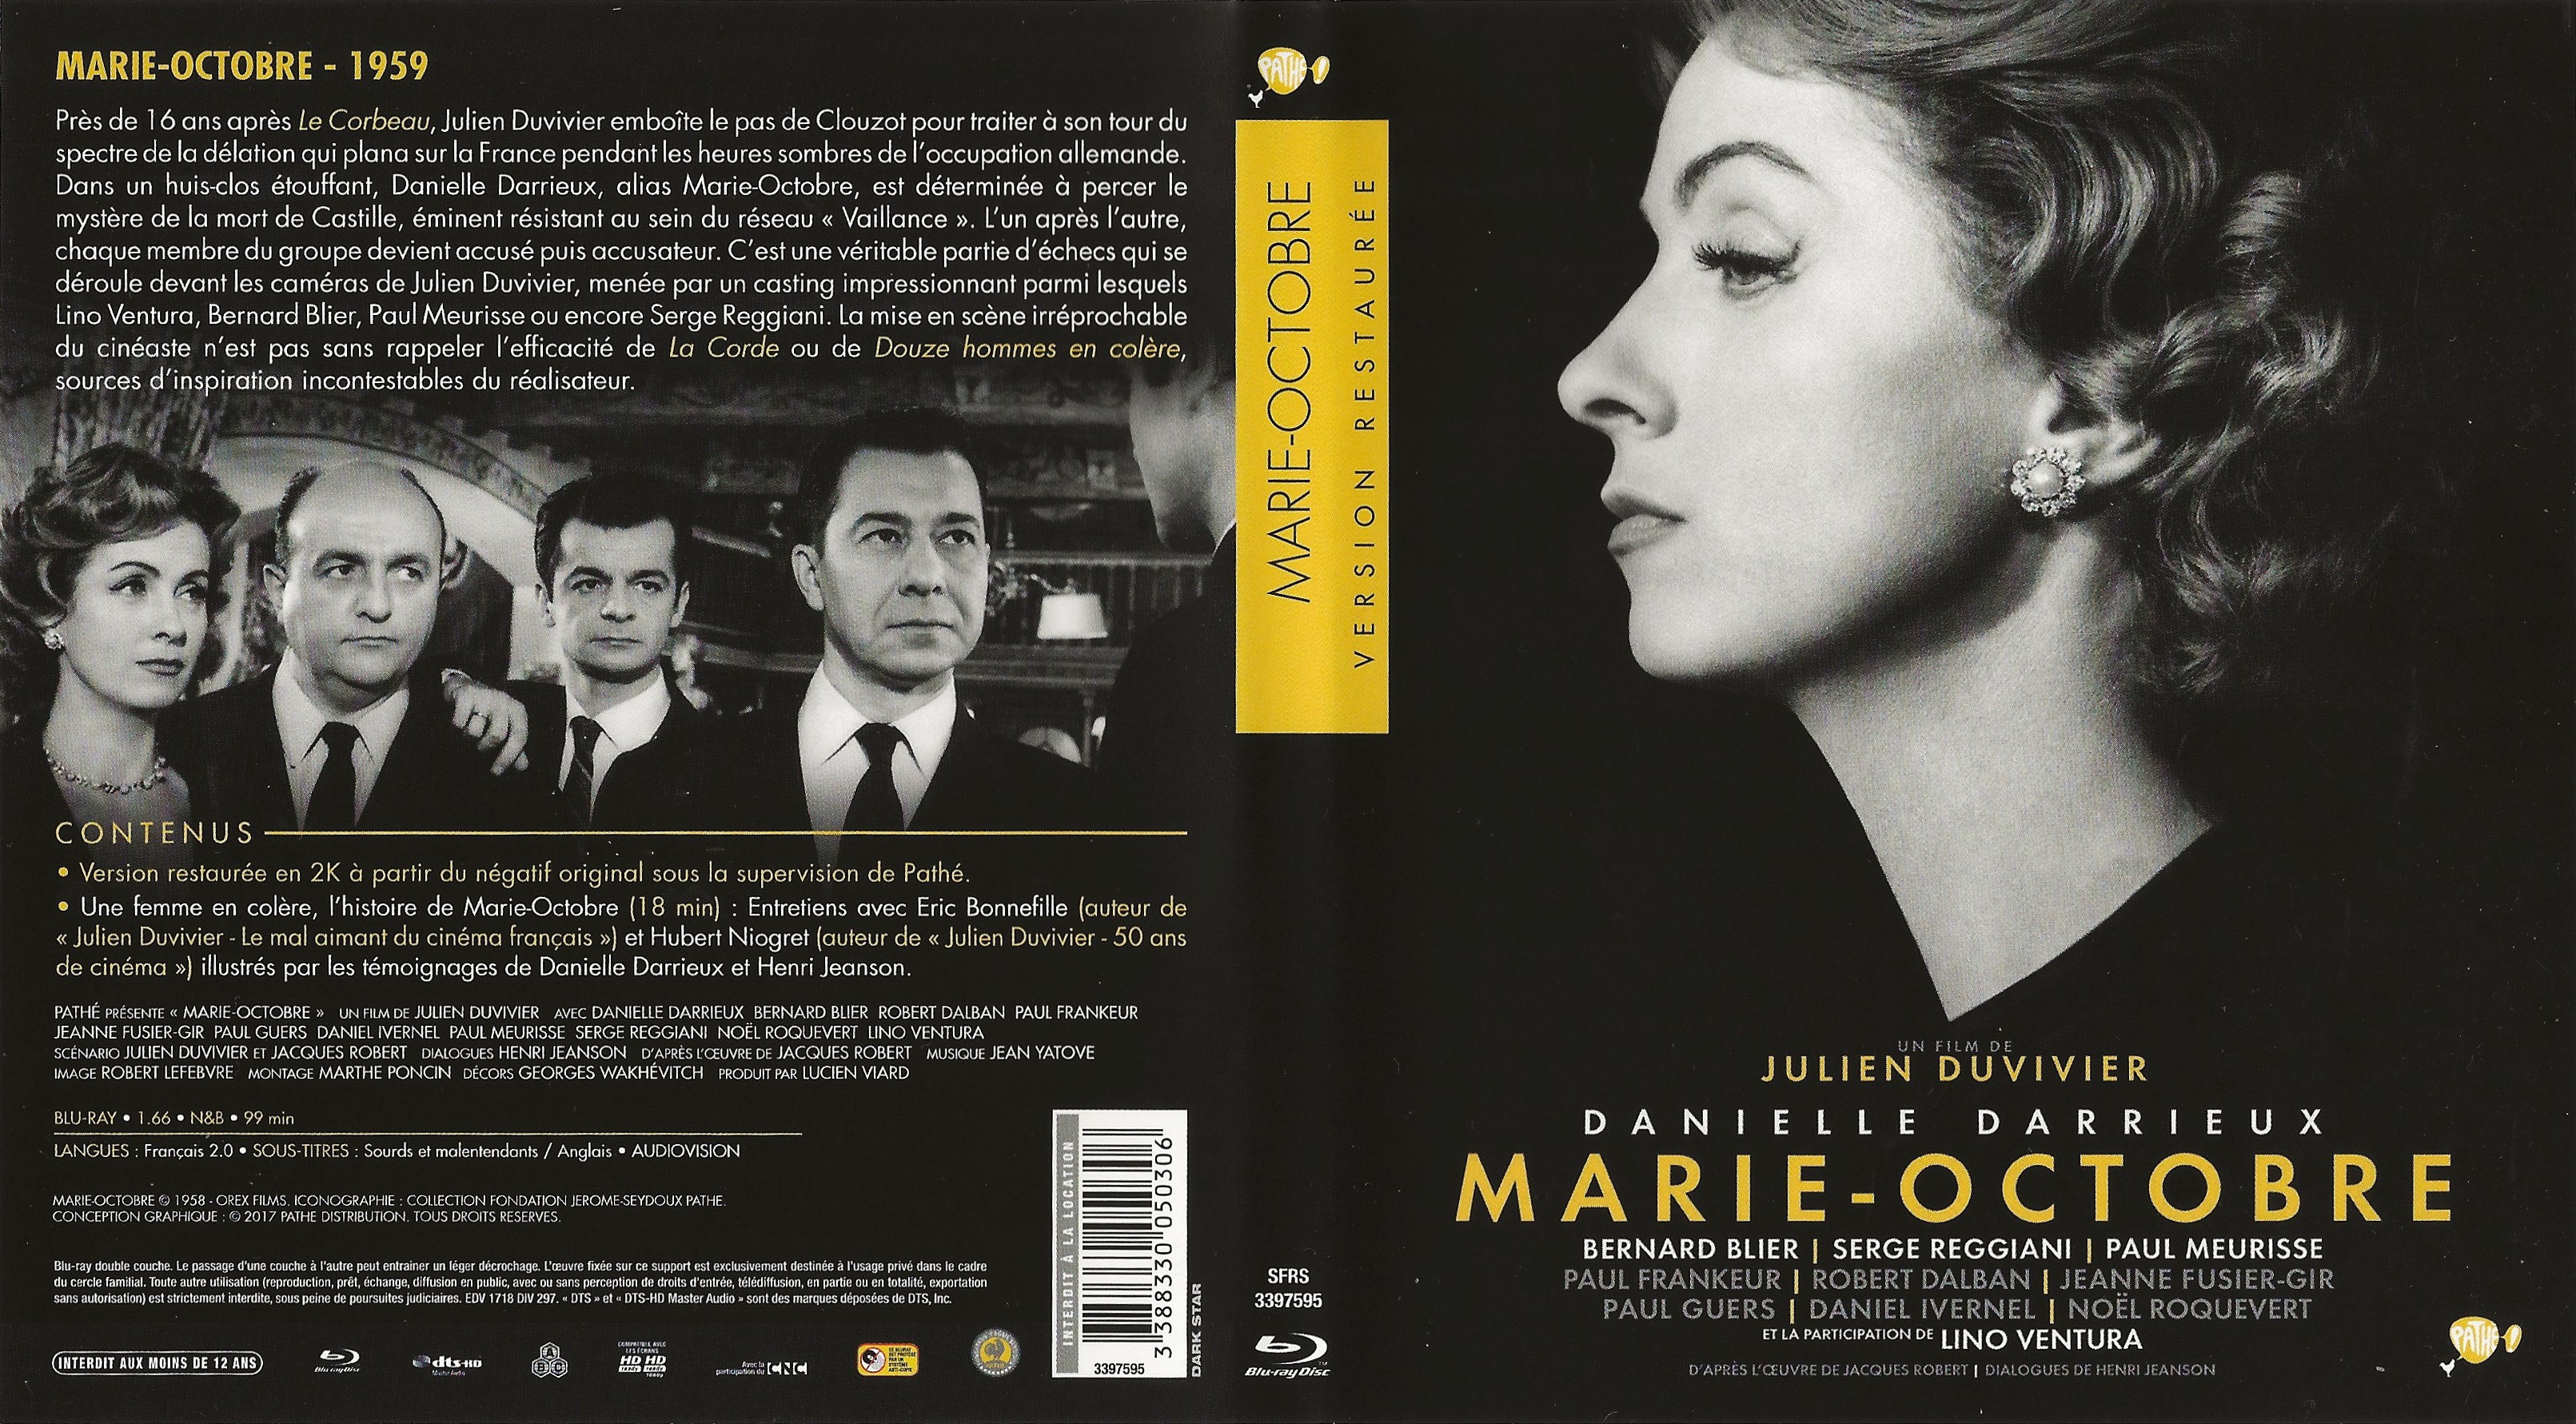 Jaquette DVD Marie-Octobre (BLU-RAY)